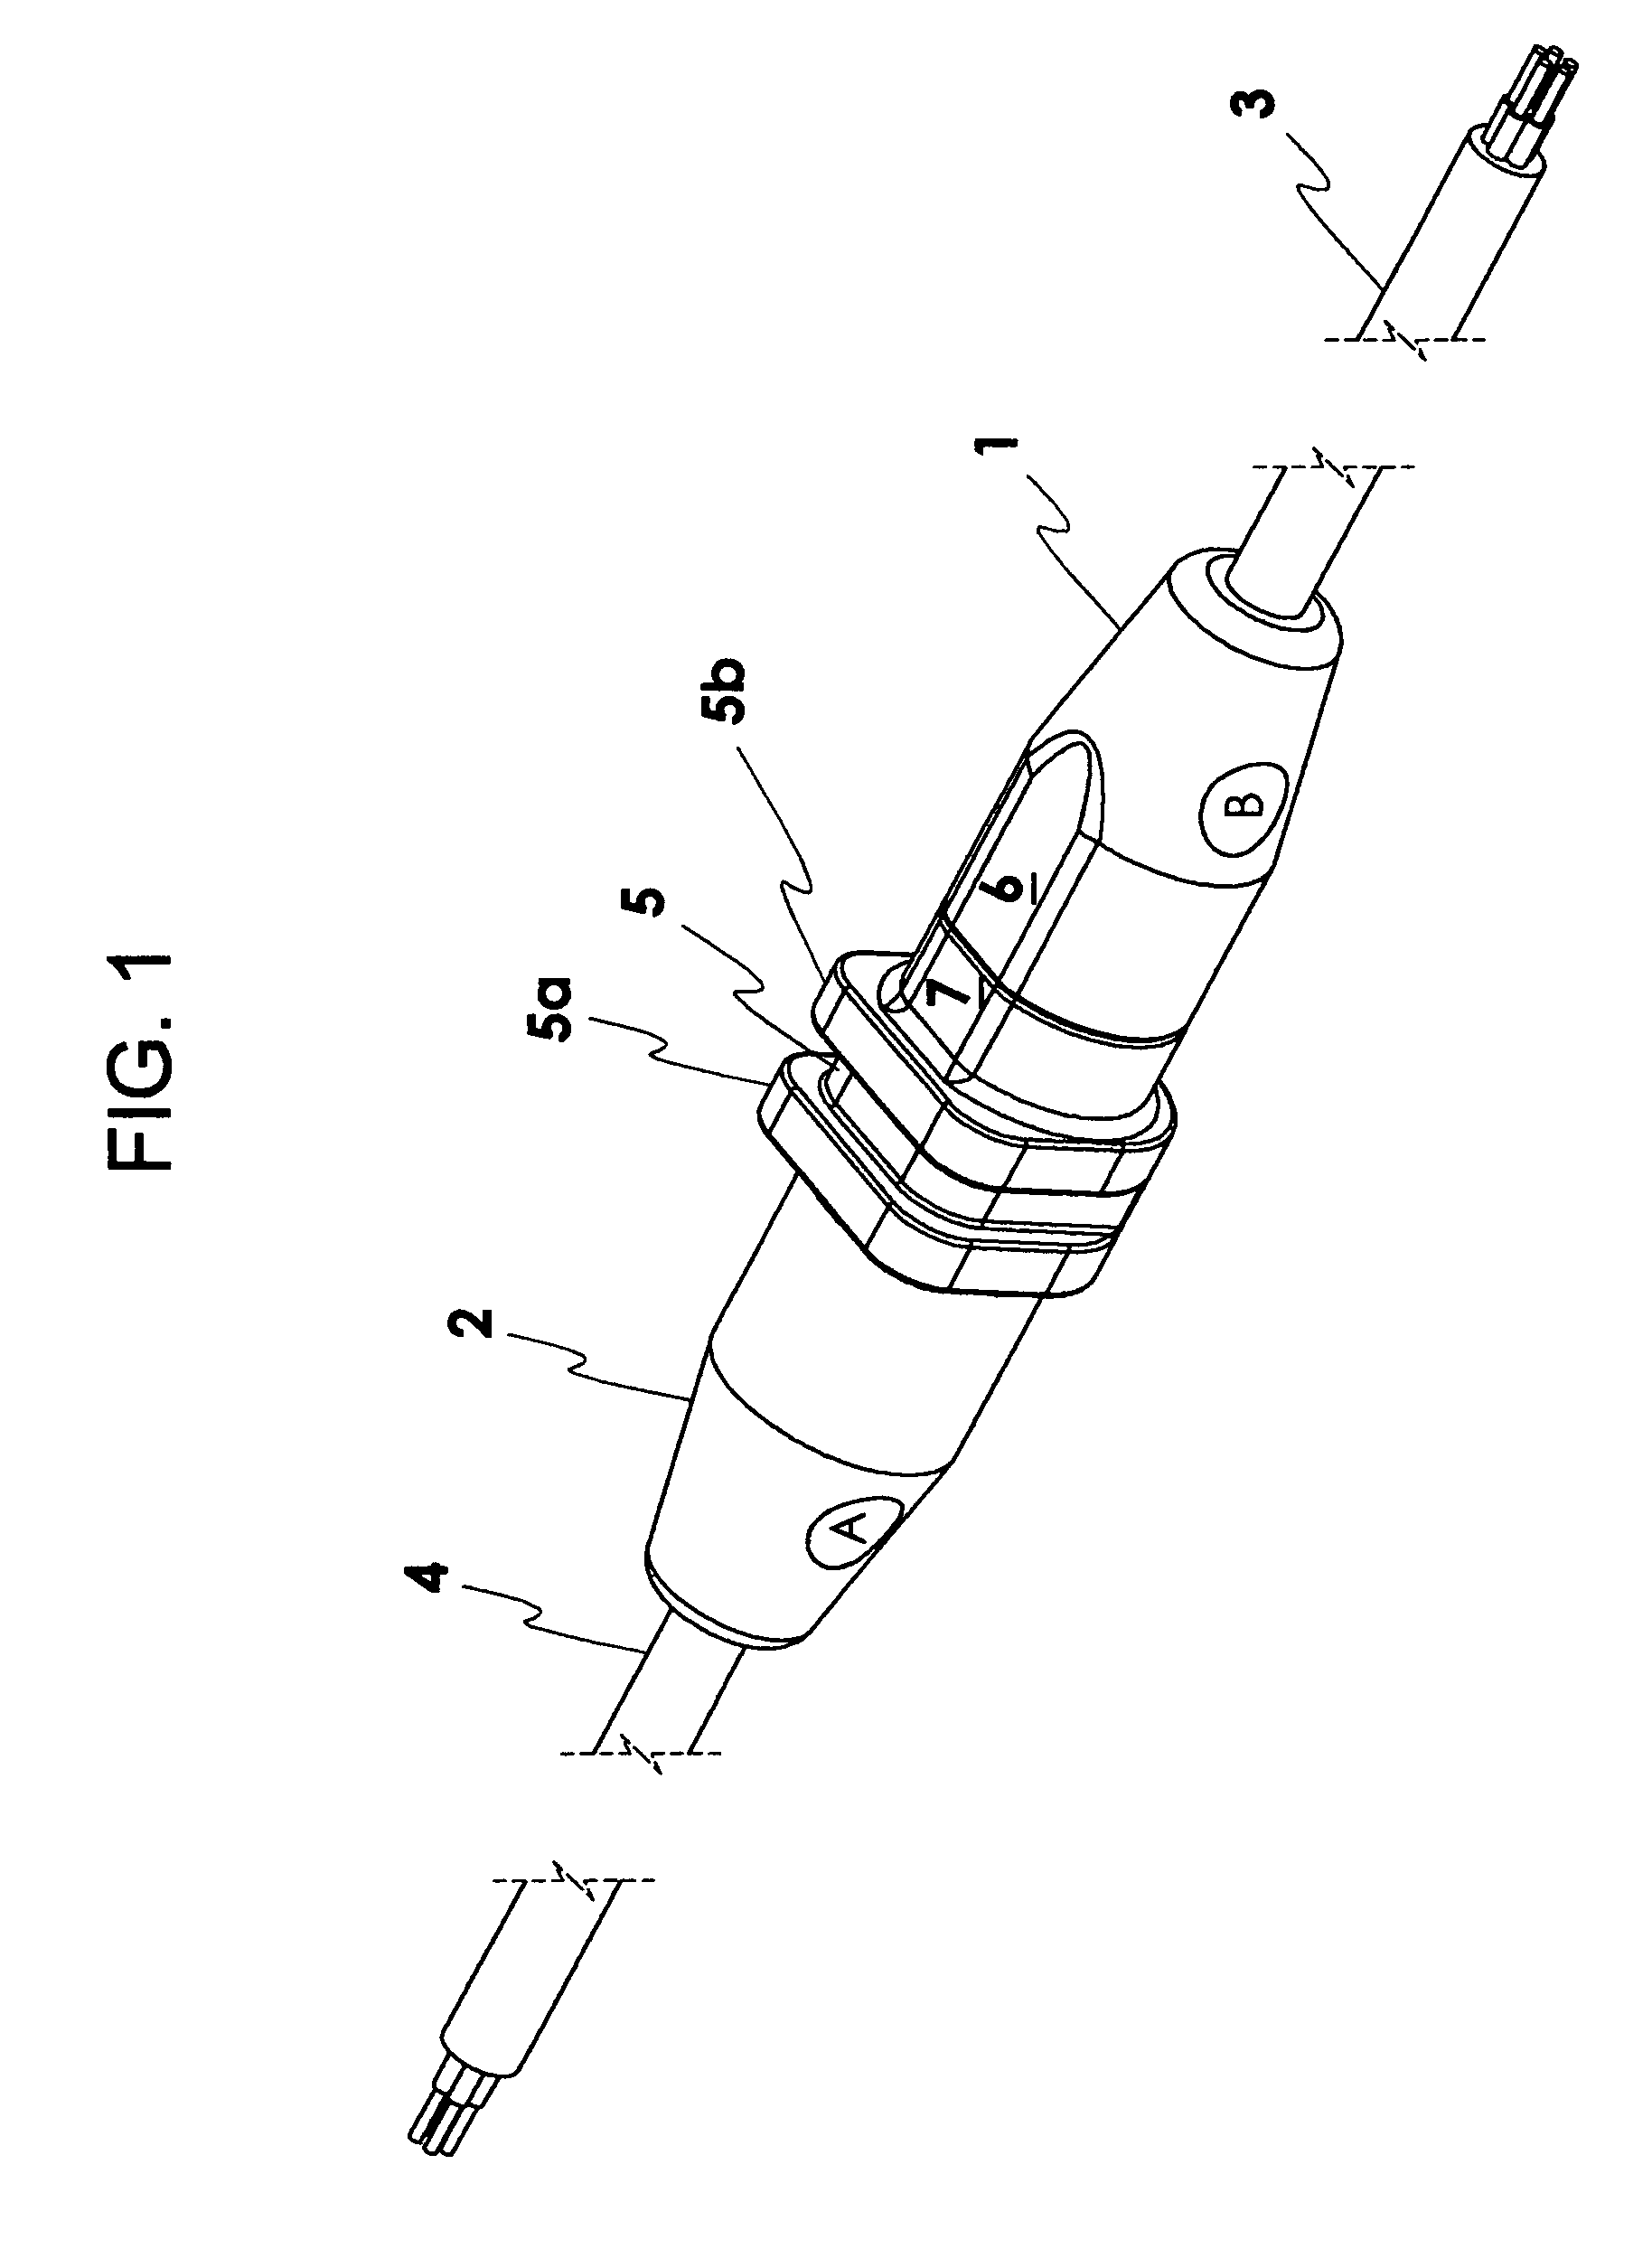 Highly moisture resistant coupler system for communications and electrical connections